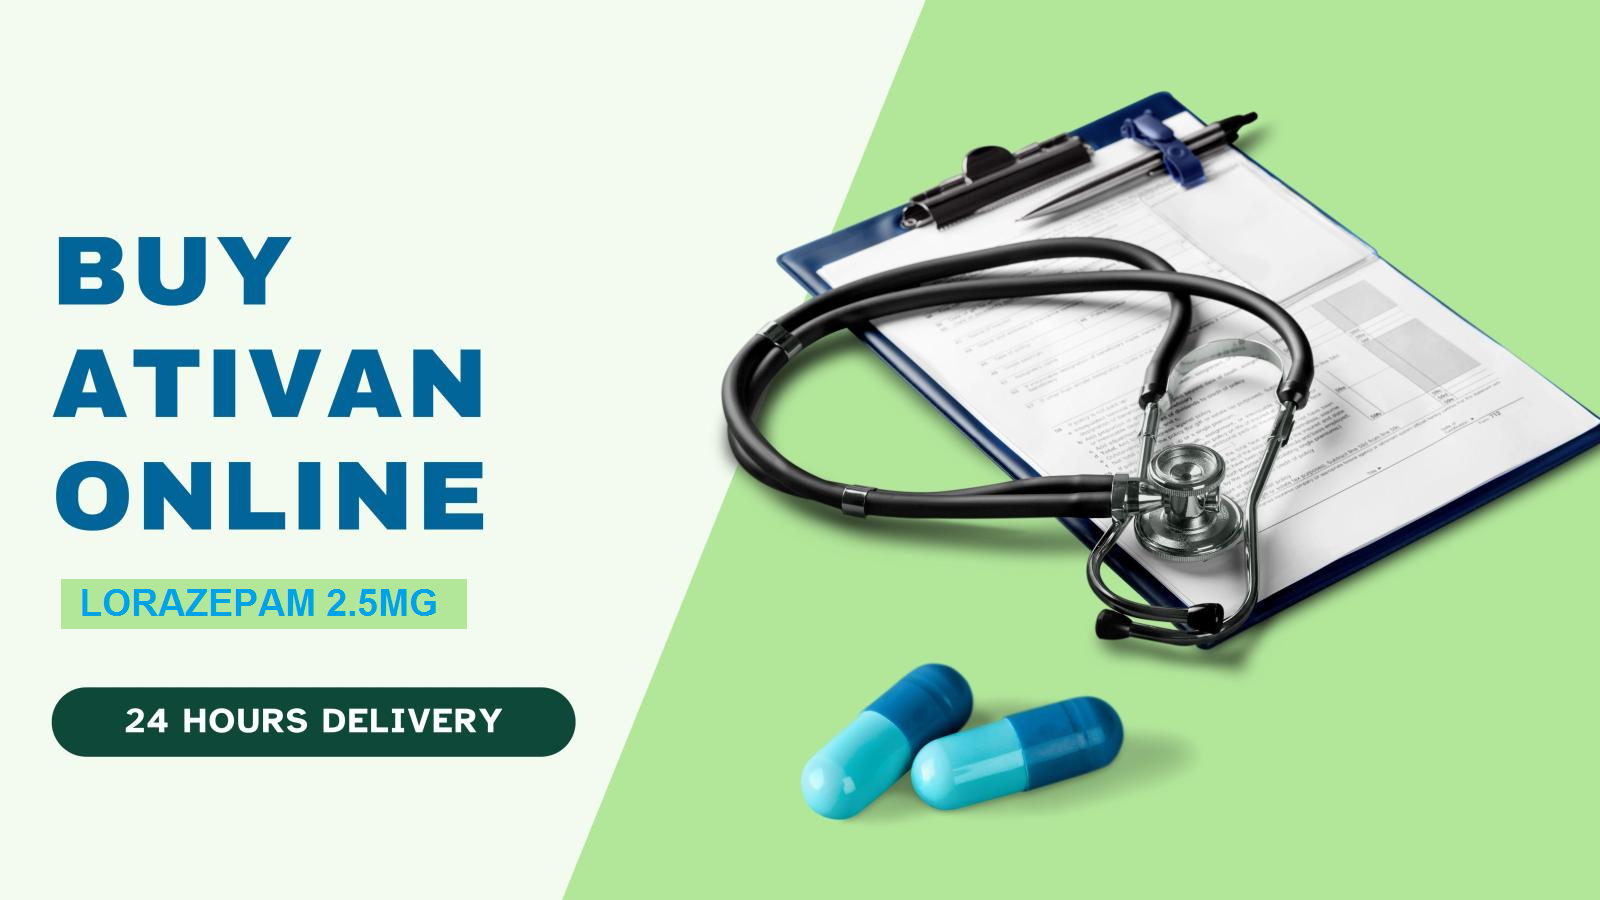 Buy Lorazepam online and get rid of Tension in Education